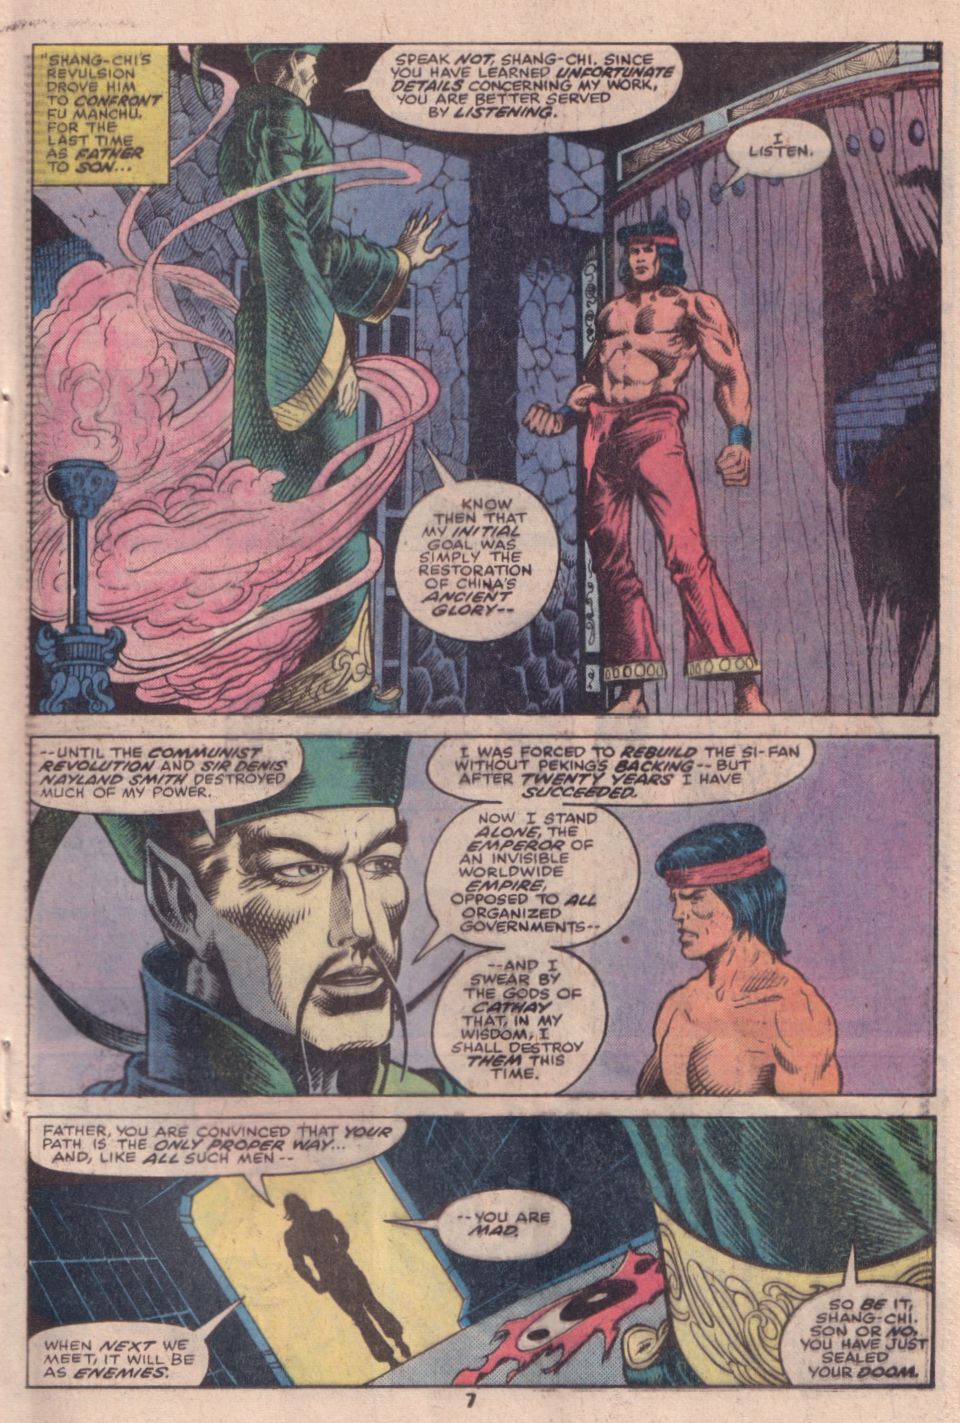 What If? (1977) issue 16 - Shang Chi Master of Kung Fu fought on The side of Fu Manchu - Page 6